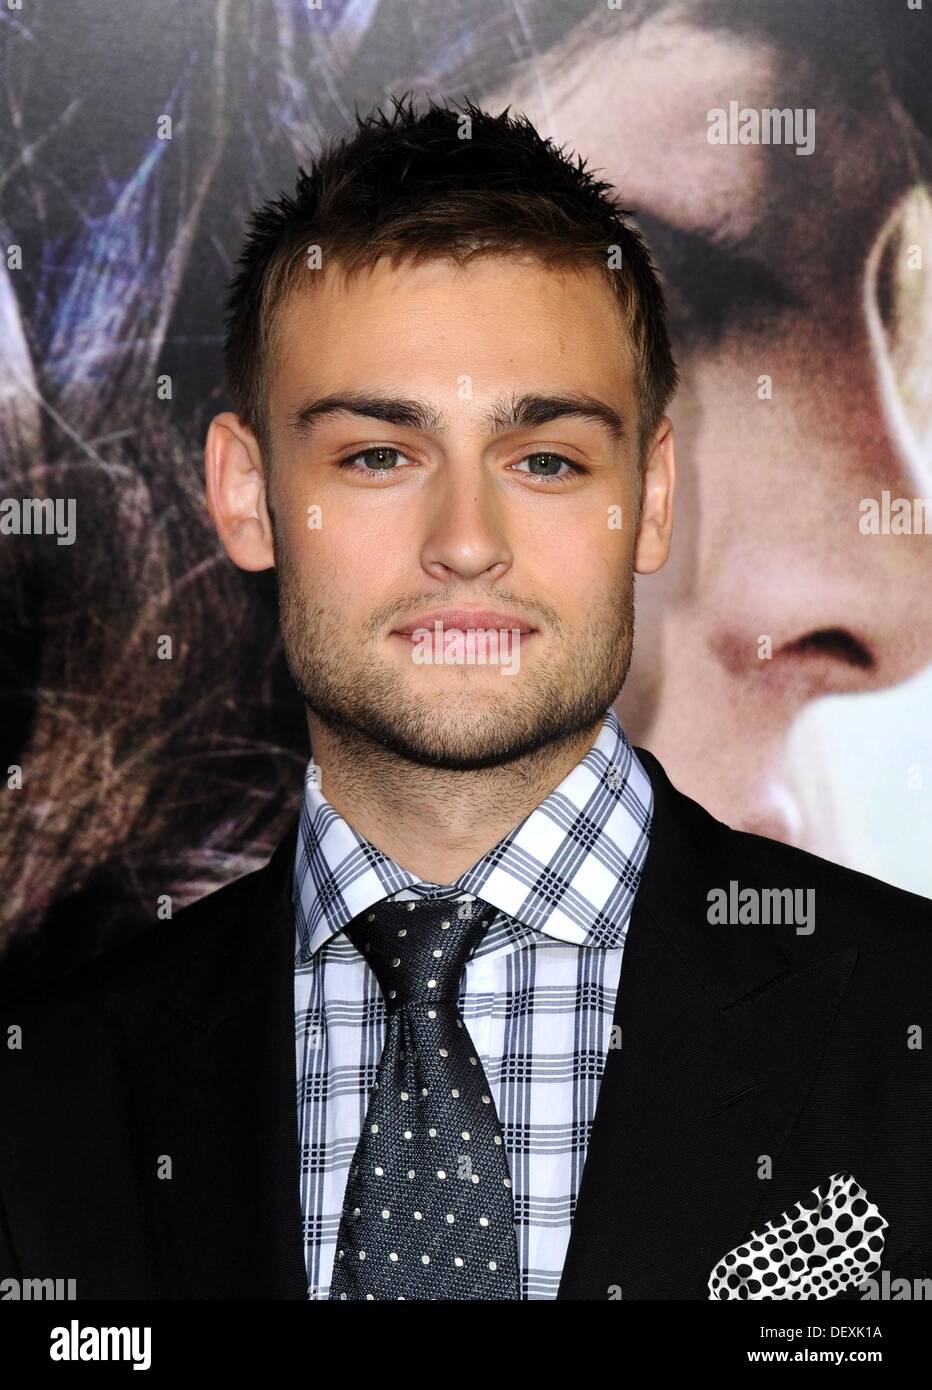 Los Angeles, CA. 24th Sep, 2013. Douglas Booth at arrivals for ROMEO AND JULIET Premiere, ArcLight Hollywood, Los Angeles, CA September 24, 2013. © Dee Cercone/Everett Collection/Alamy Live News Stock Photo